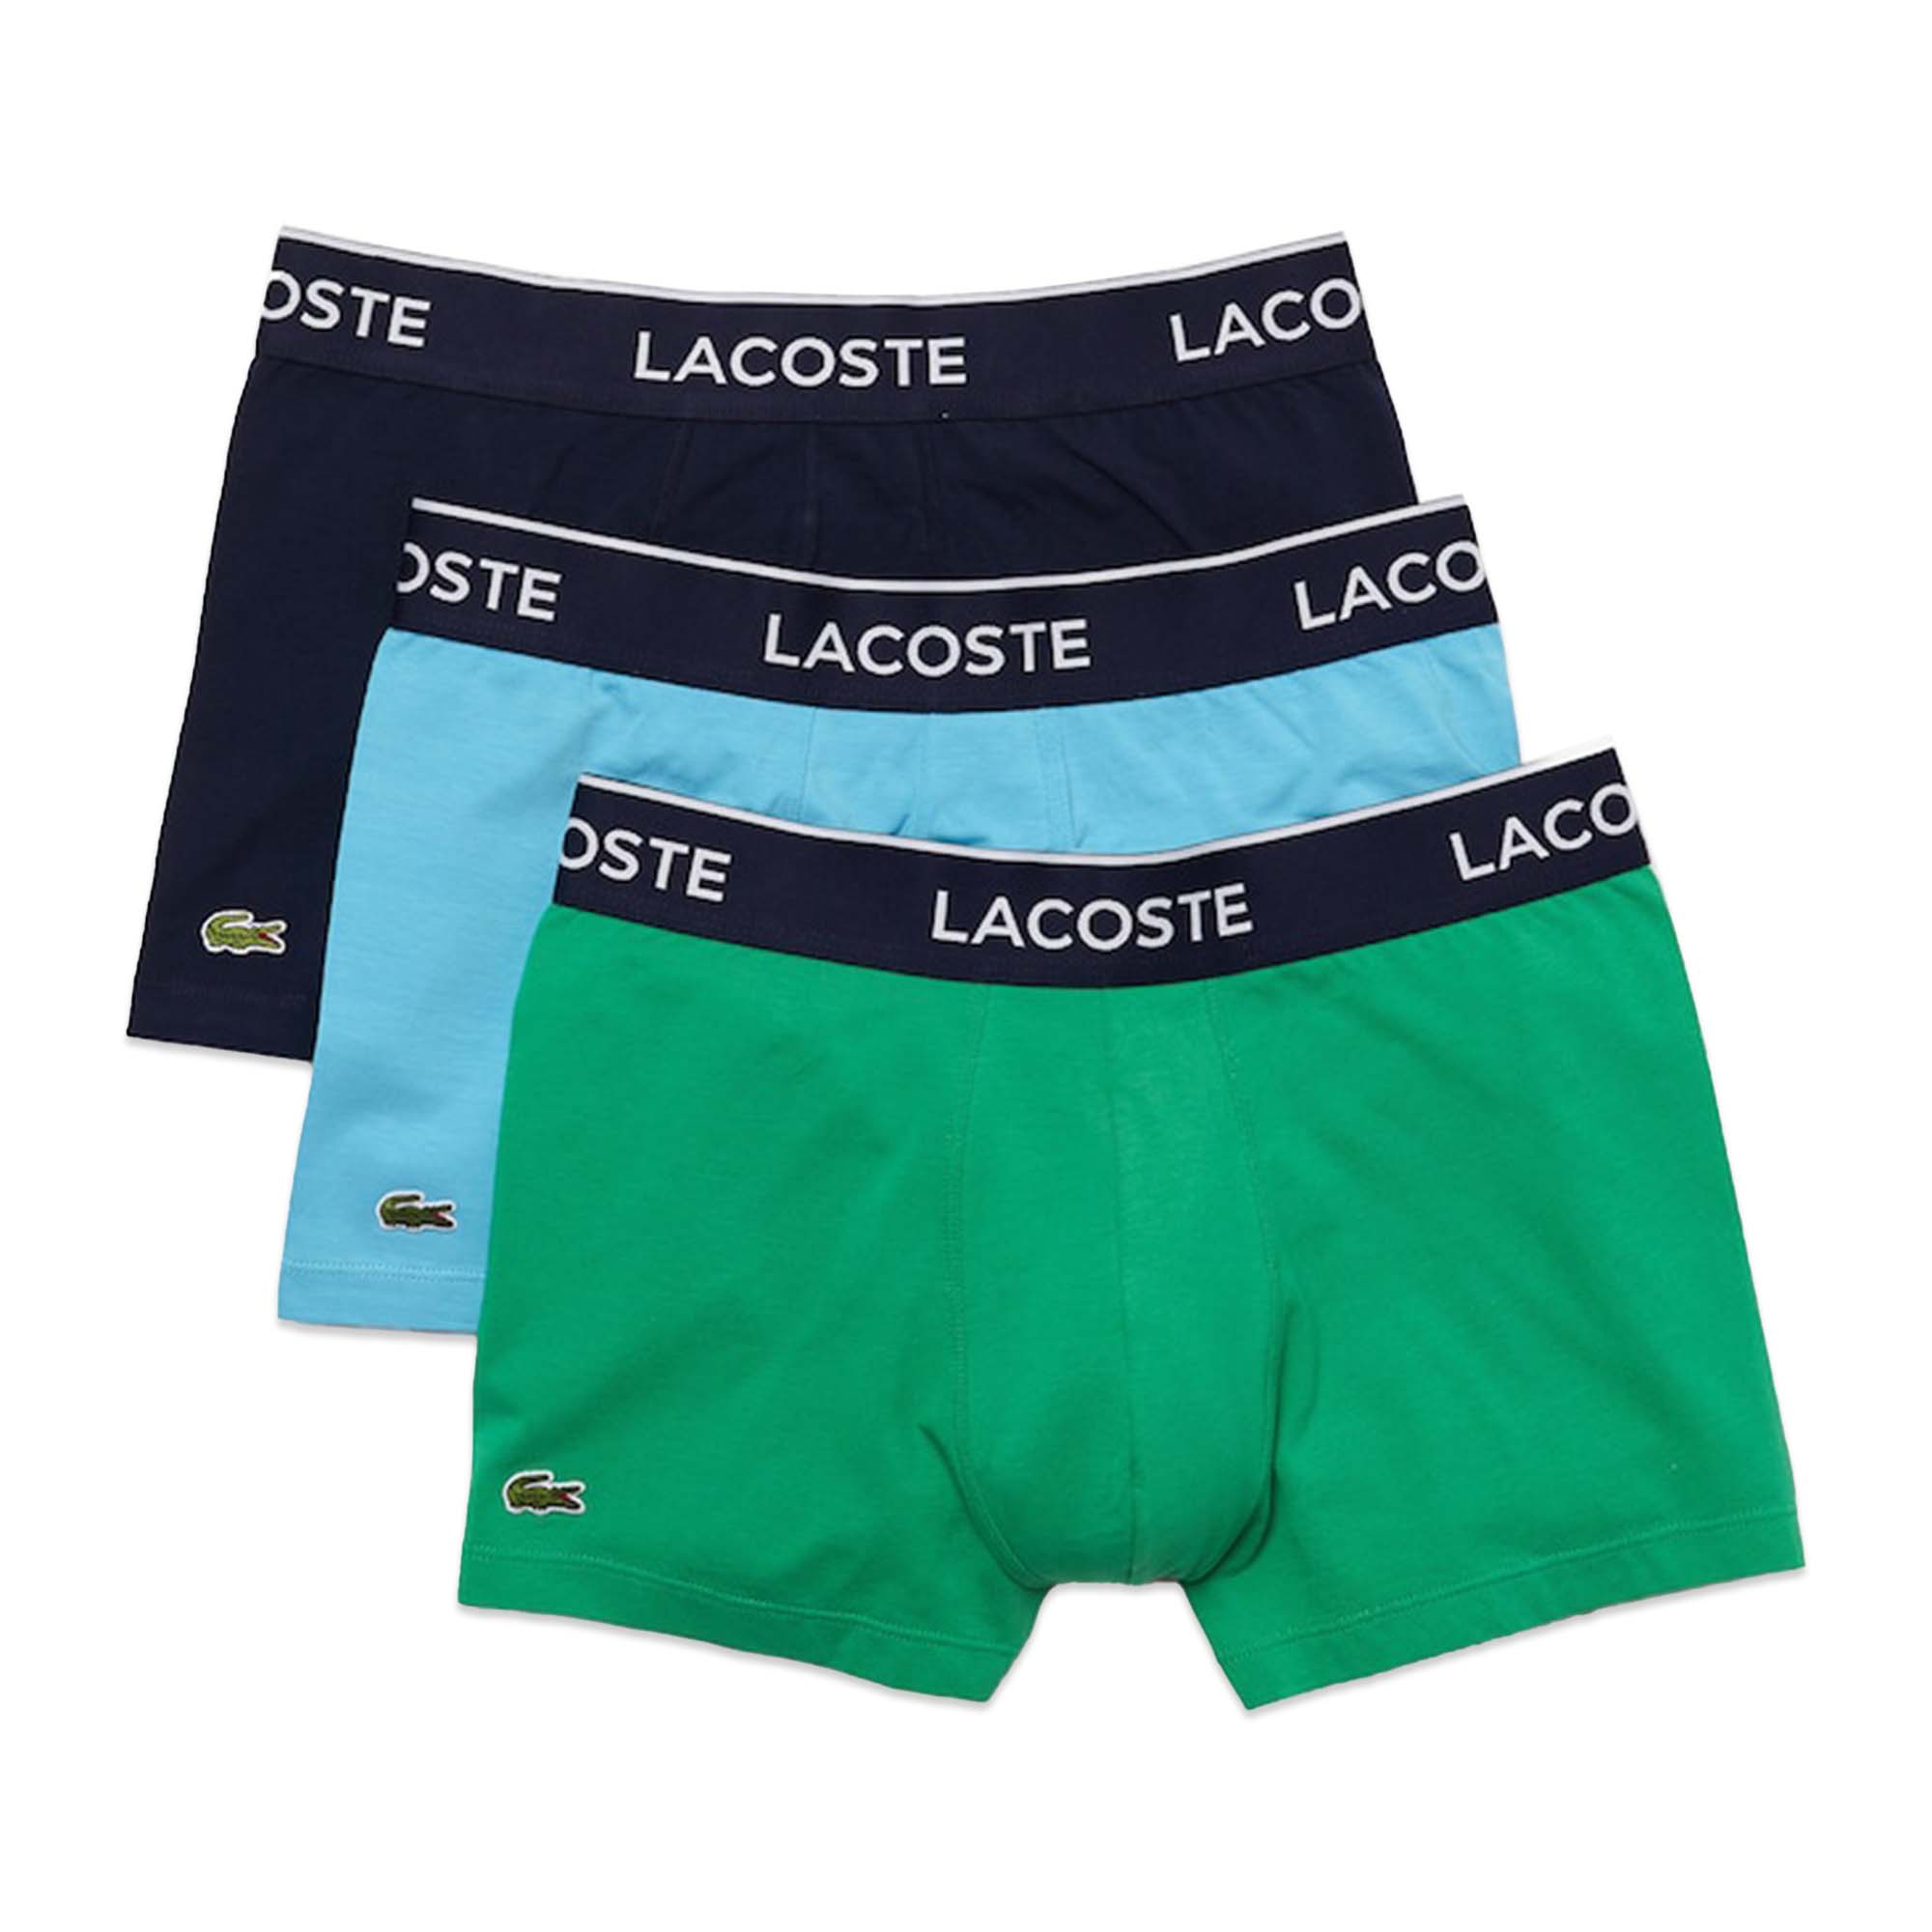 Lacoste 3 Pack Cotton Stretch Trunks - Sky/Green/Navy